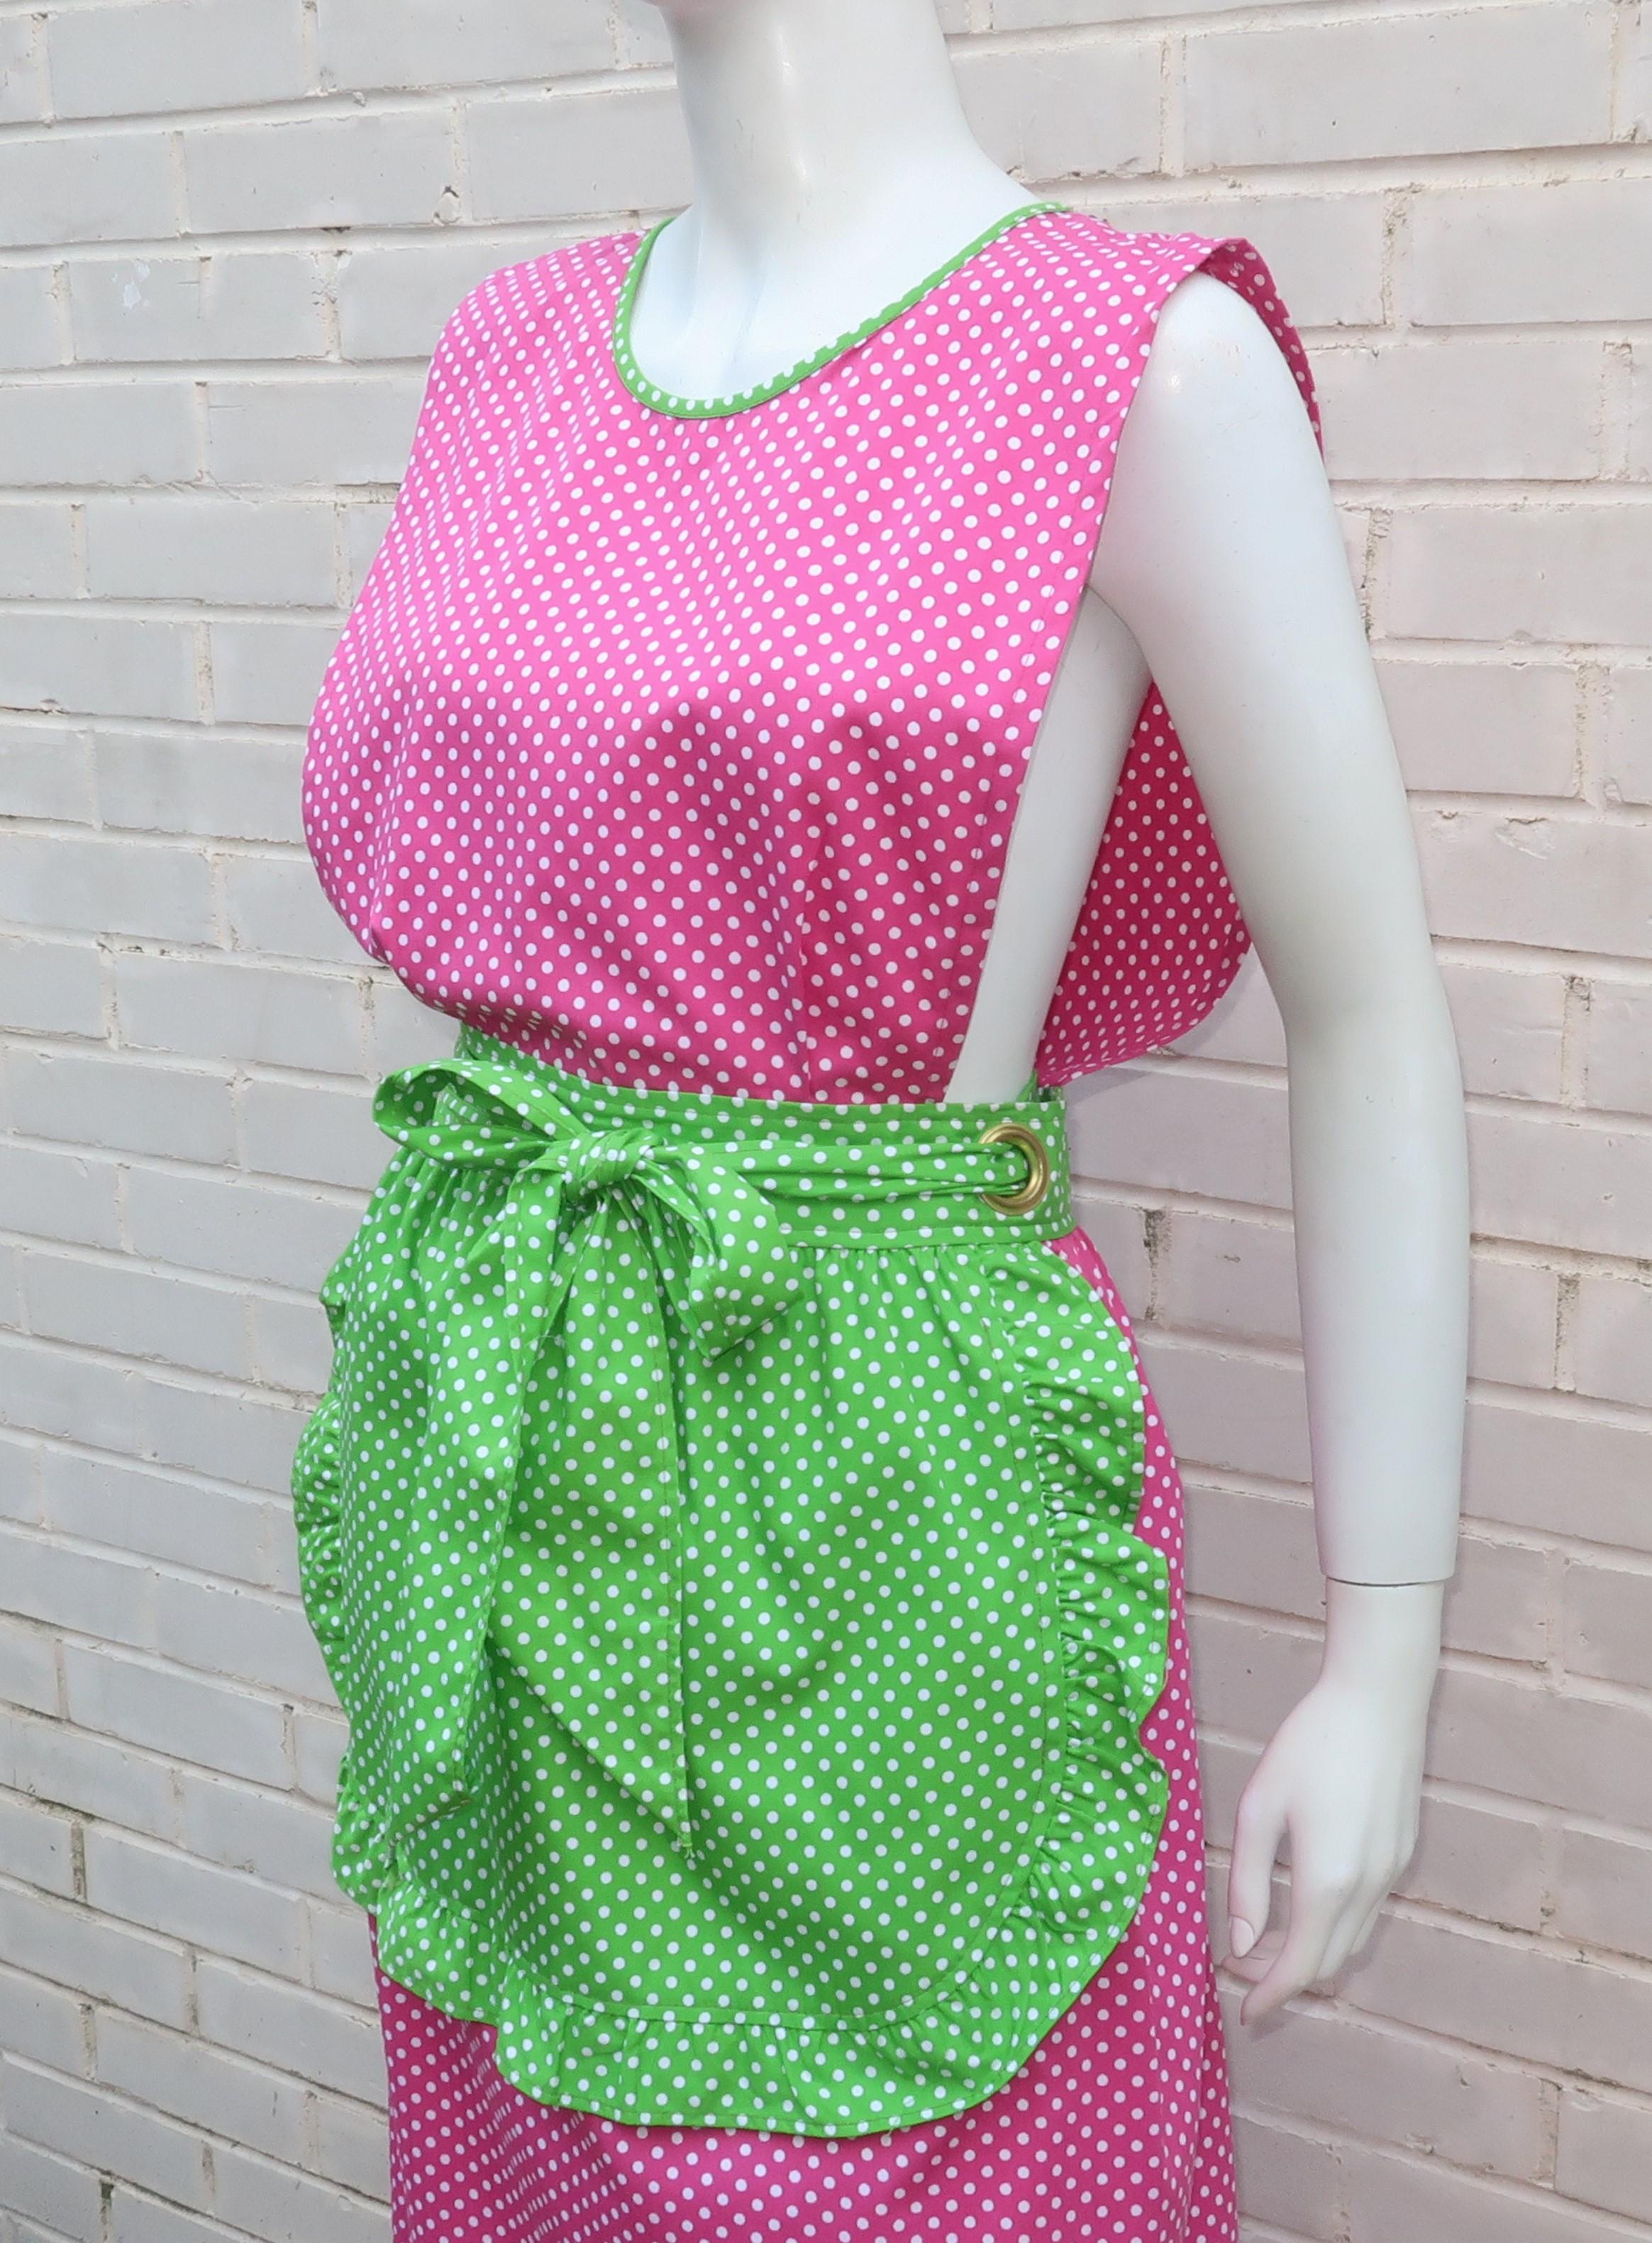 Design House Pink & Green Cotton Pinafore Apron Dress, C.1970 For Sale 1